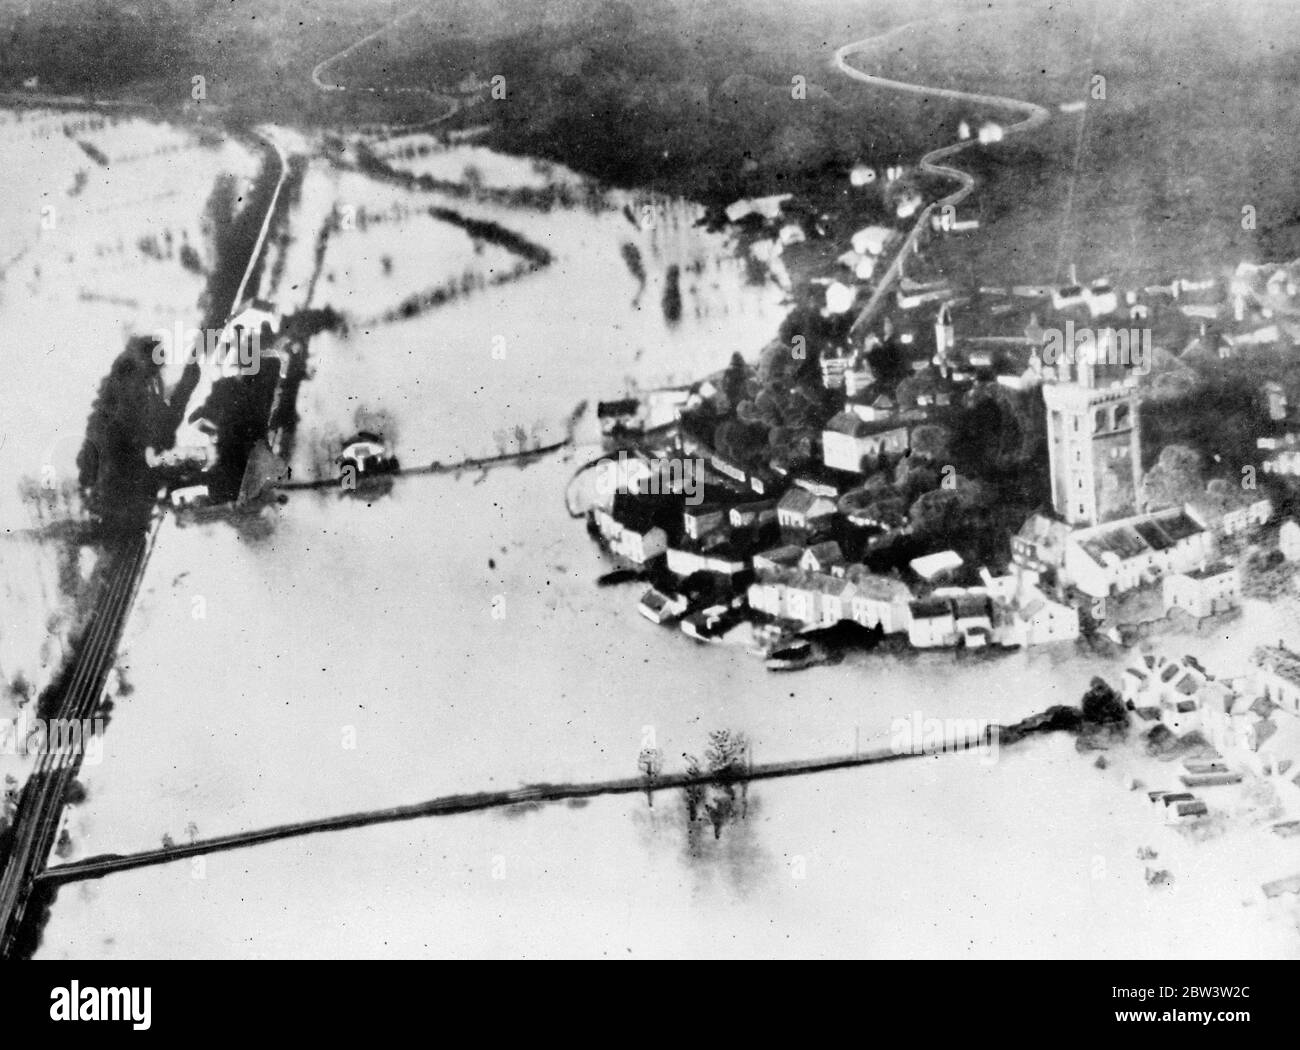 France underwater picture from the air . The French town of Nantes is menaced by the worst floods known for many years . The waters are still rising desoite ceaseless efforts to avert complete disaster . The terror stricken population threaten to panic though police and relief workers are attempting to maintain calm . Photo shows , a view from the air of flooded Nantes . In the picture can be seen the Tower of Oudon ( right ) and teh partly submerged railway line . 8 January 1936 . Stock Photo